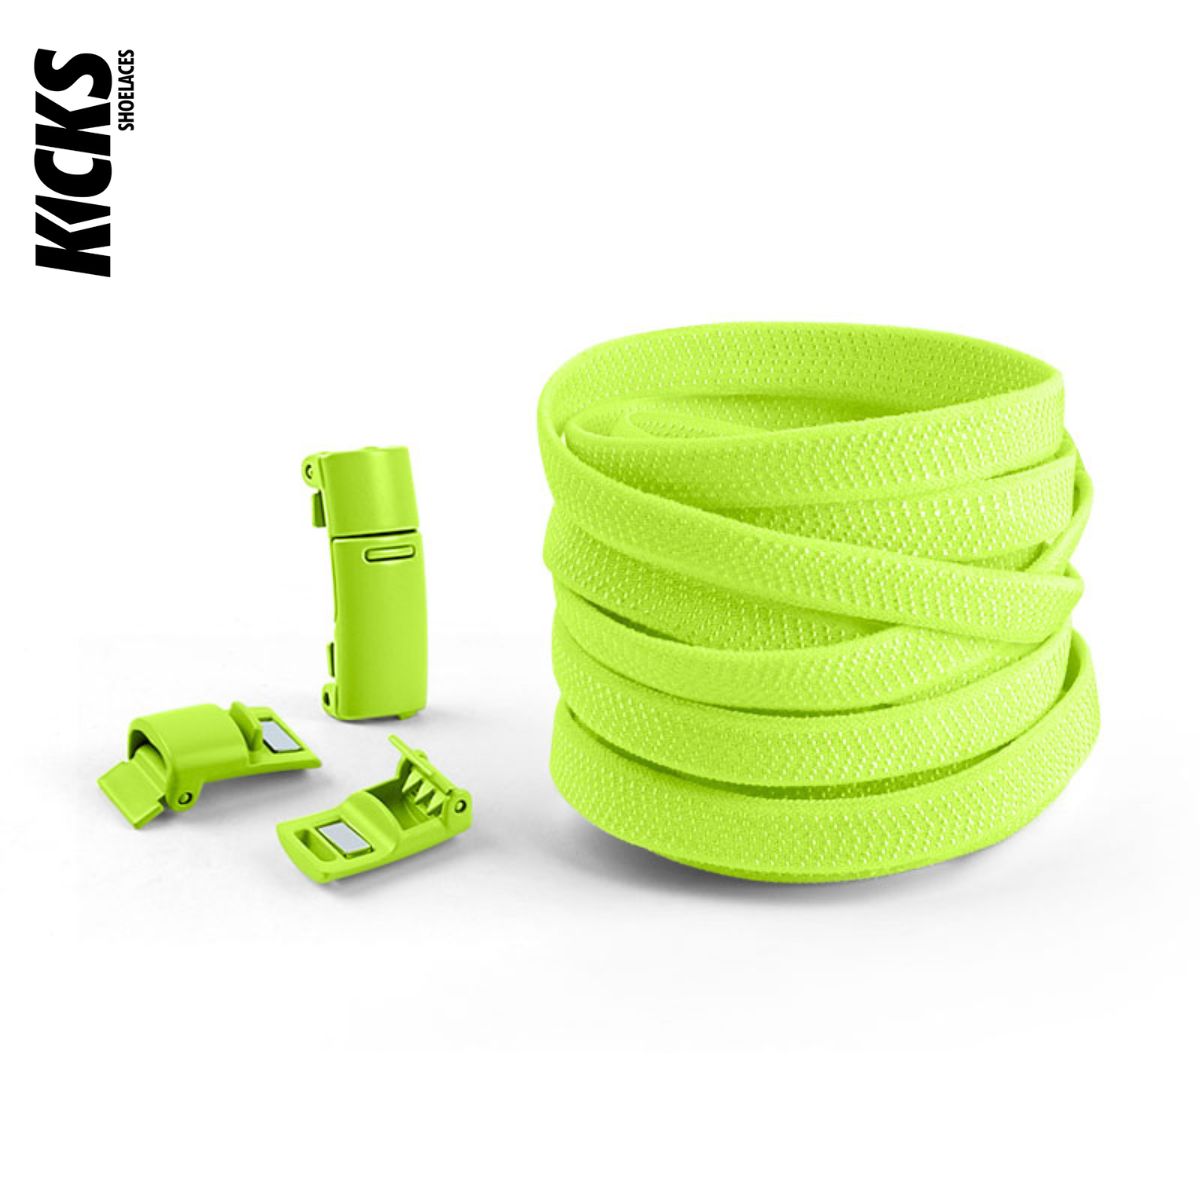 Fluorescent Green No-Tie Shoelaces with Magnetic Locks